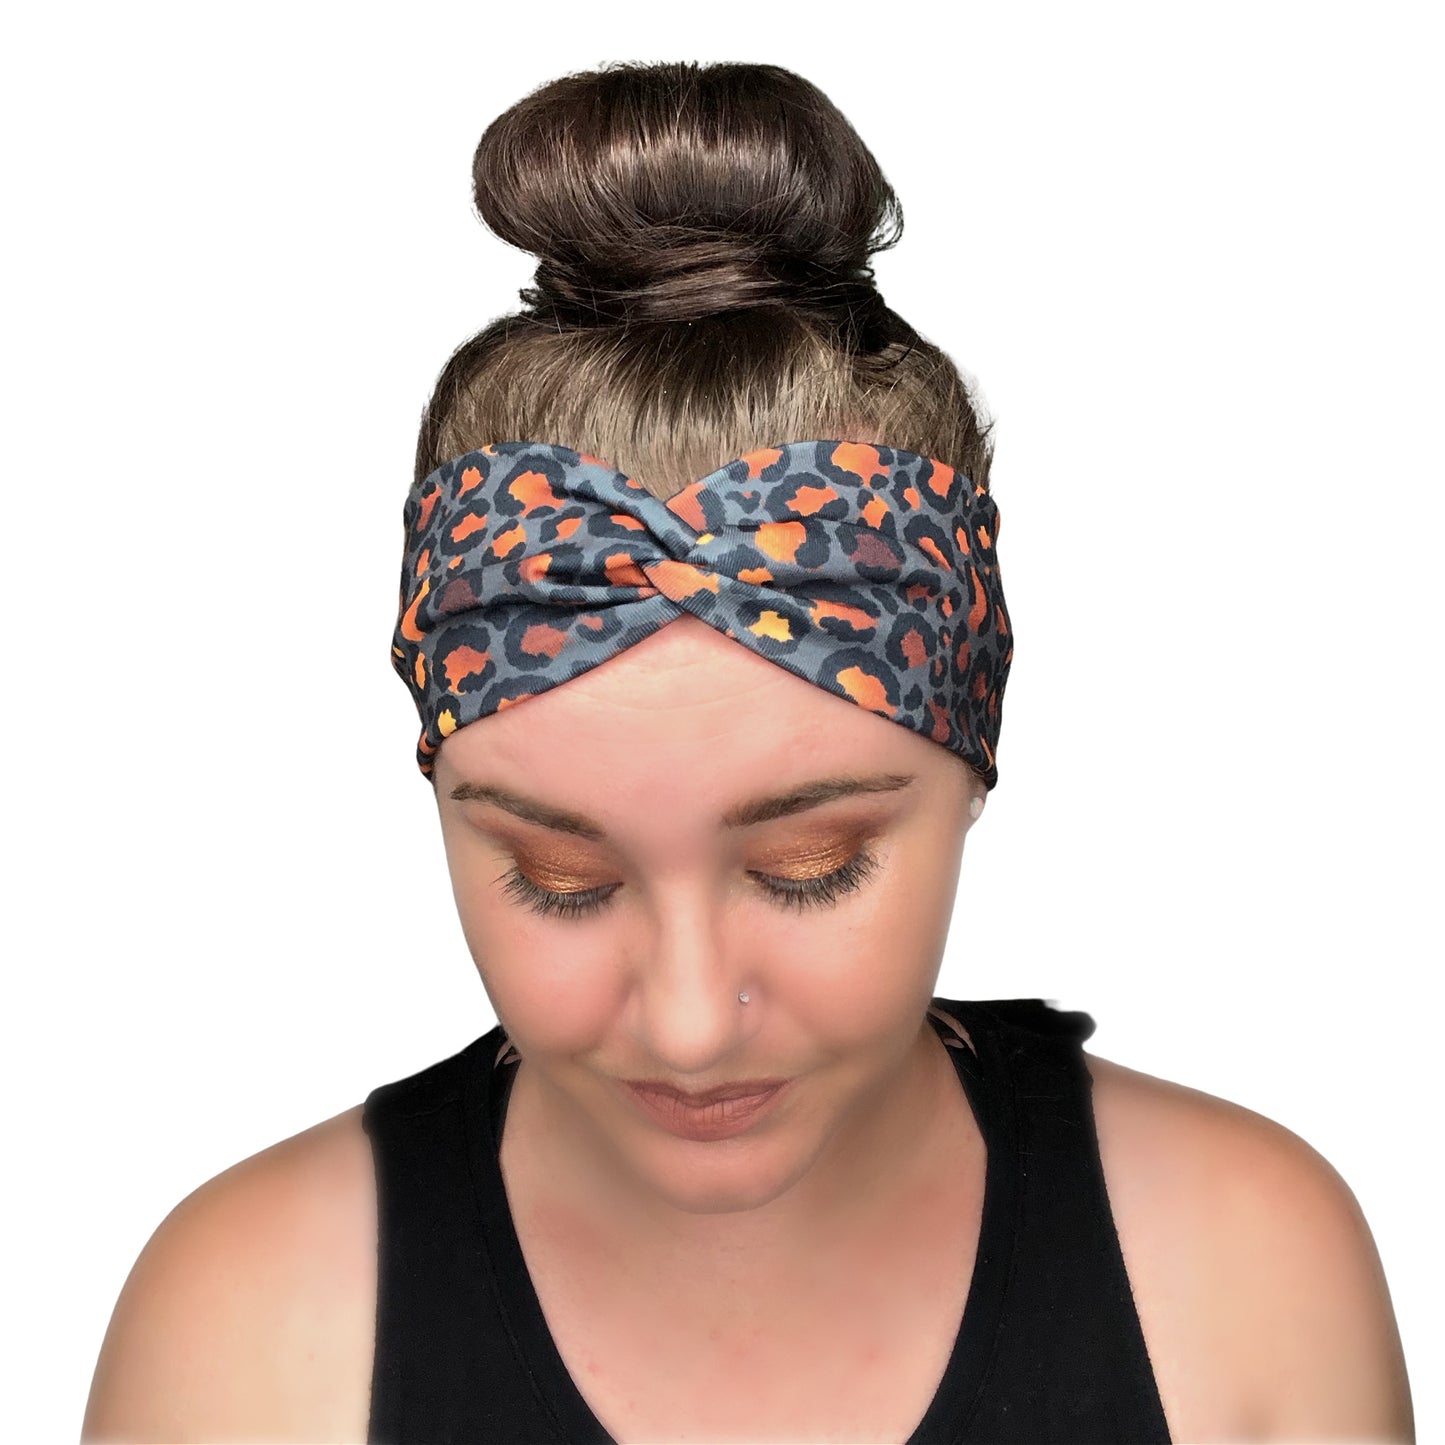 Pink and Blue Tie Dye Headband for Women